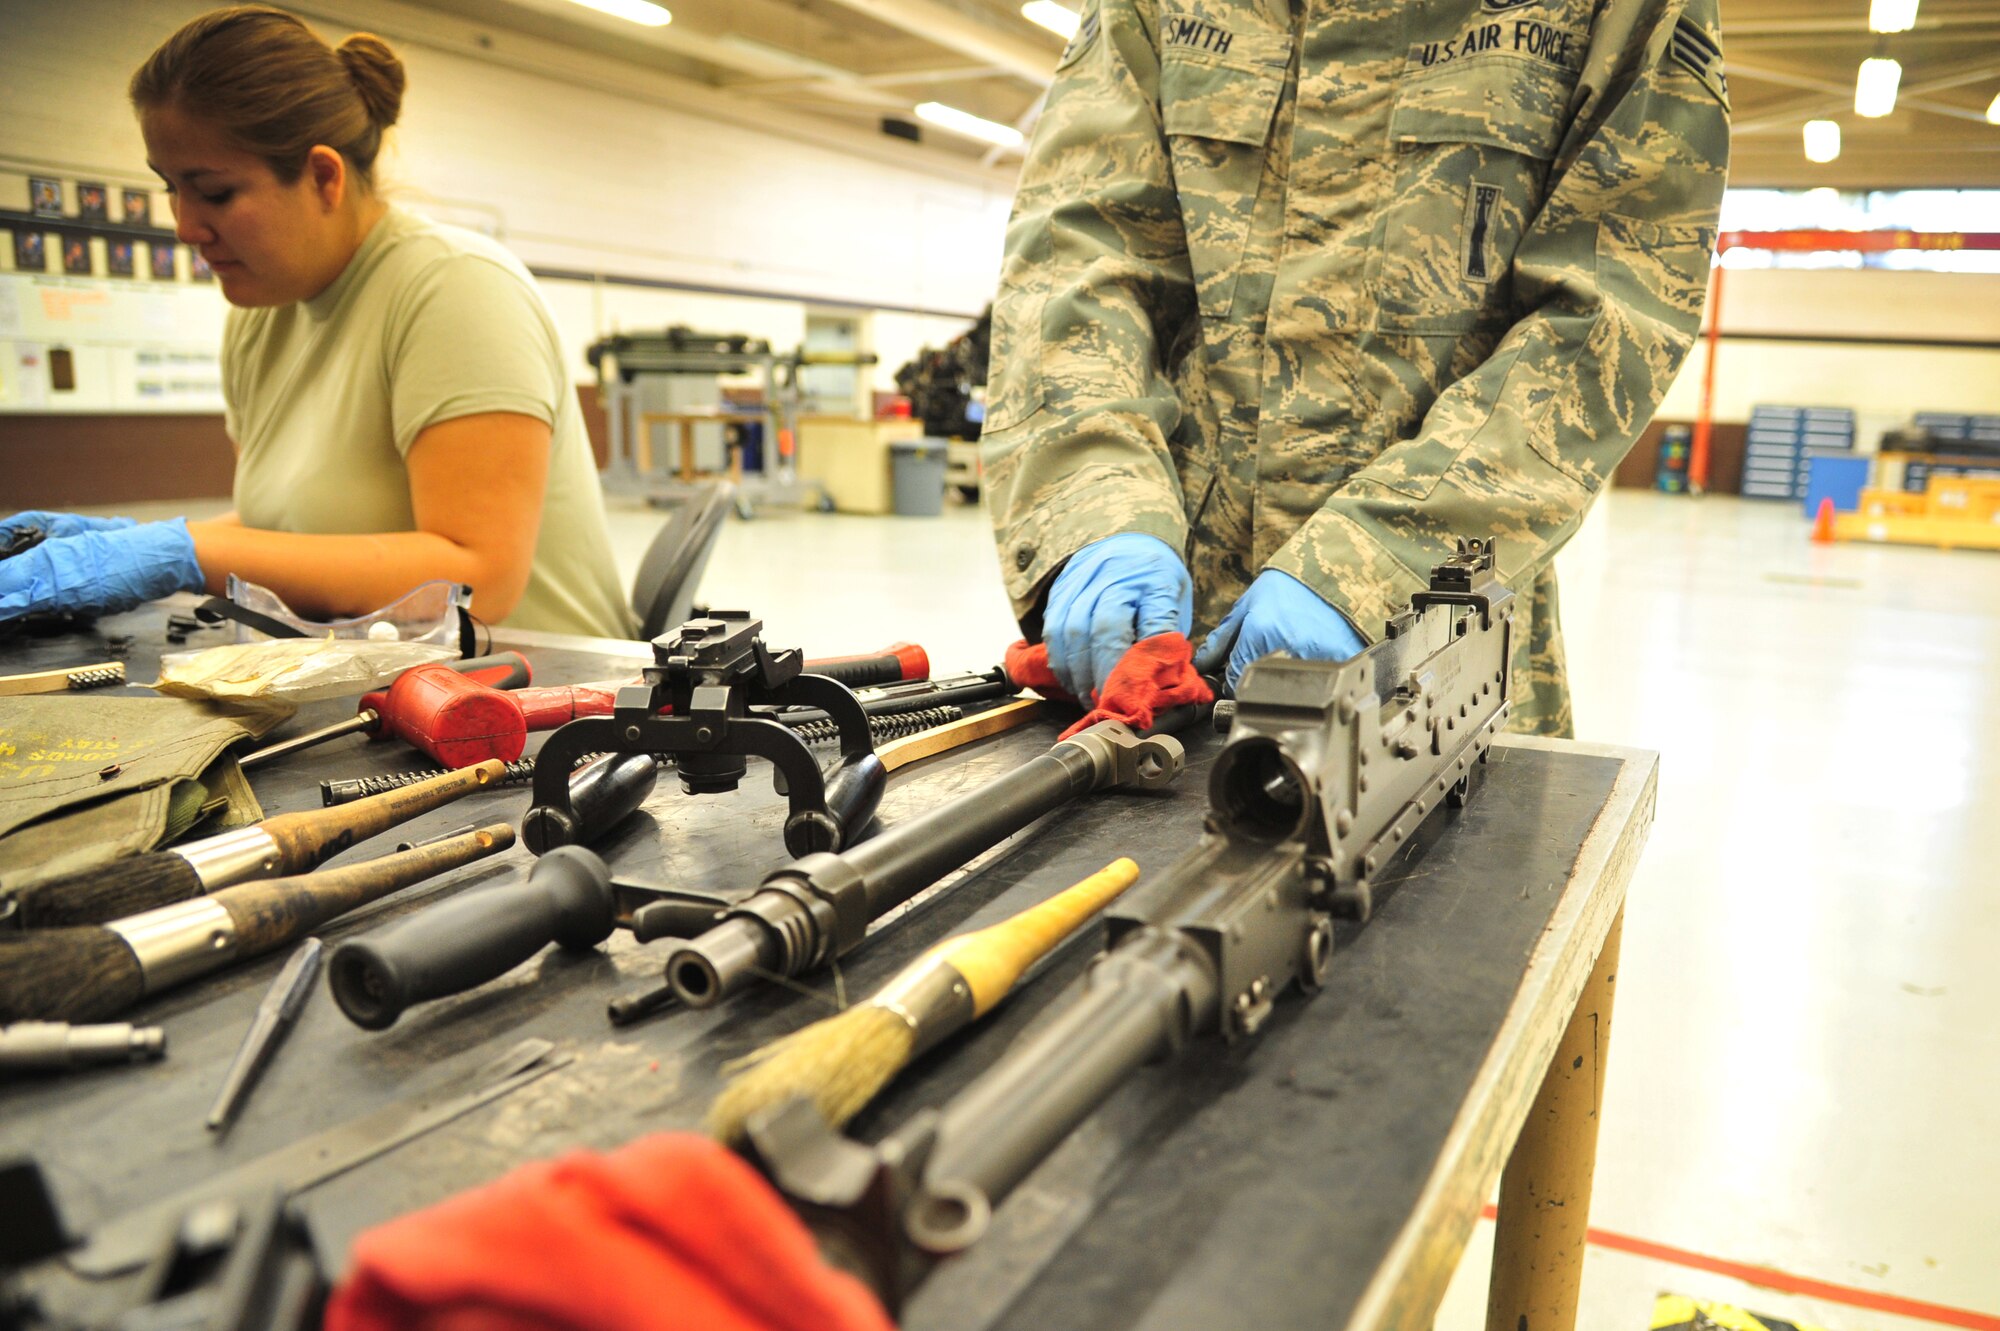 U.S. Air Force Senior Airman Brad Smith, 27th Special Operations Maintenance Squadron, works with several weapon components in the armament shop at Cannon Air Force Base, N.M., Aug. 14, 2012. Armament troops handle disassembling, cleaning, lubing and inspecting weaponry for their assigned aircraft at Cannon. (U.S. Air Force photo/Airman 1st Class Alexxis Pons Abascal)  